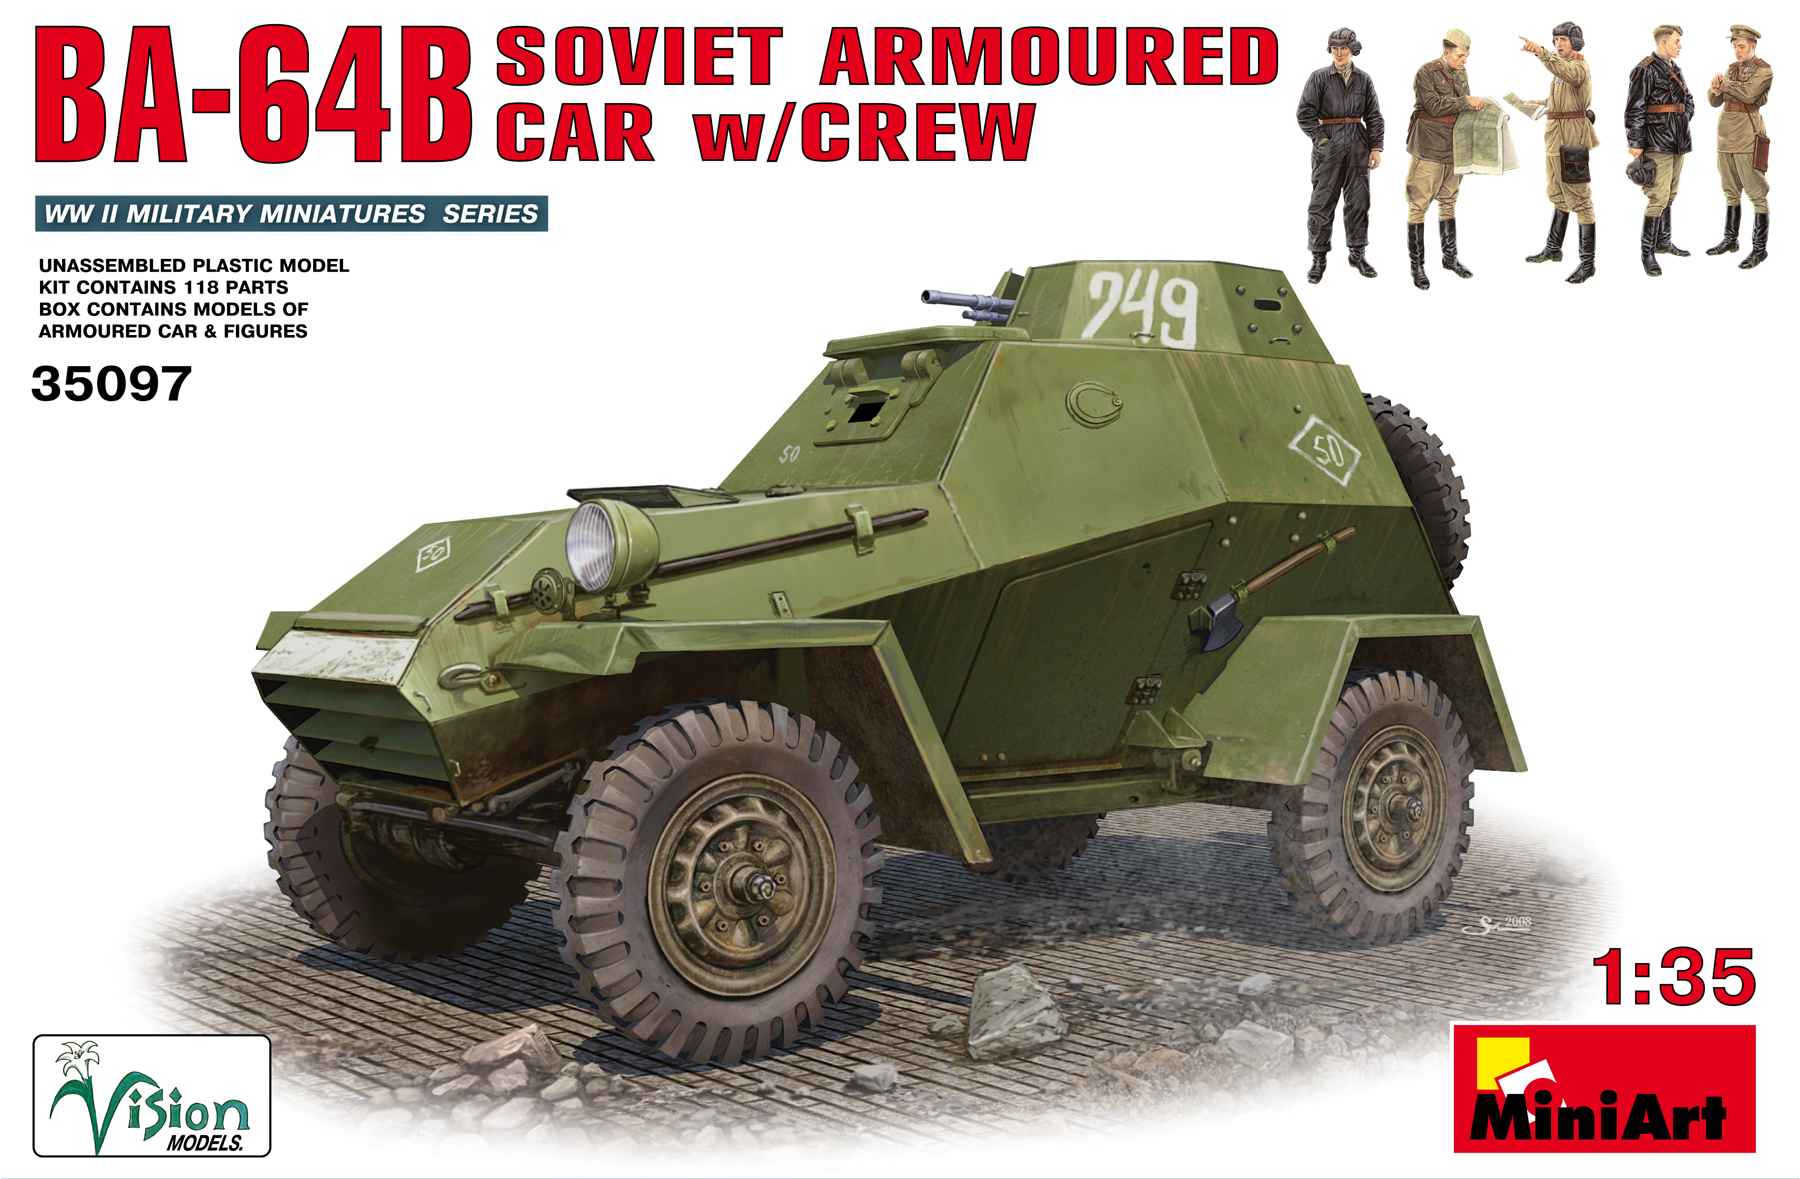 Details about   Vmodels 35025 Latches On Post-War WWII Soviet Armored Vehicles Scale 1/35 